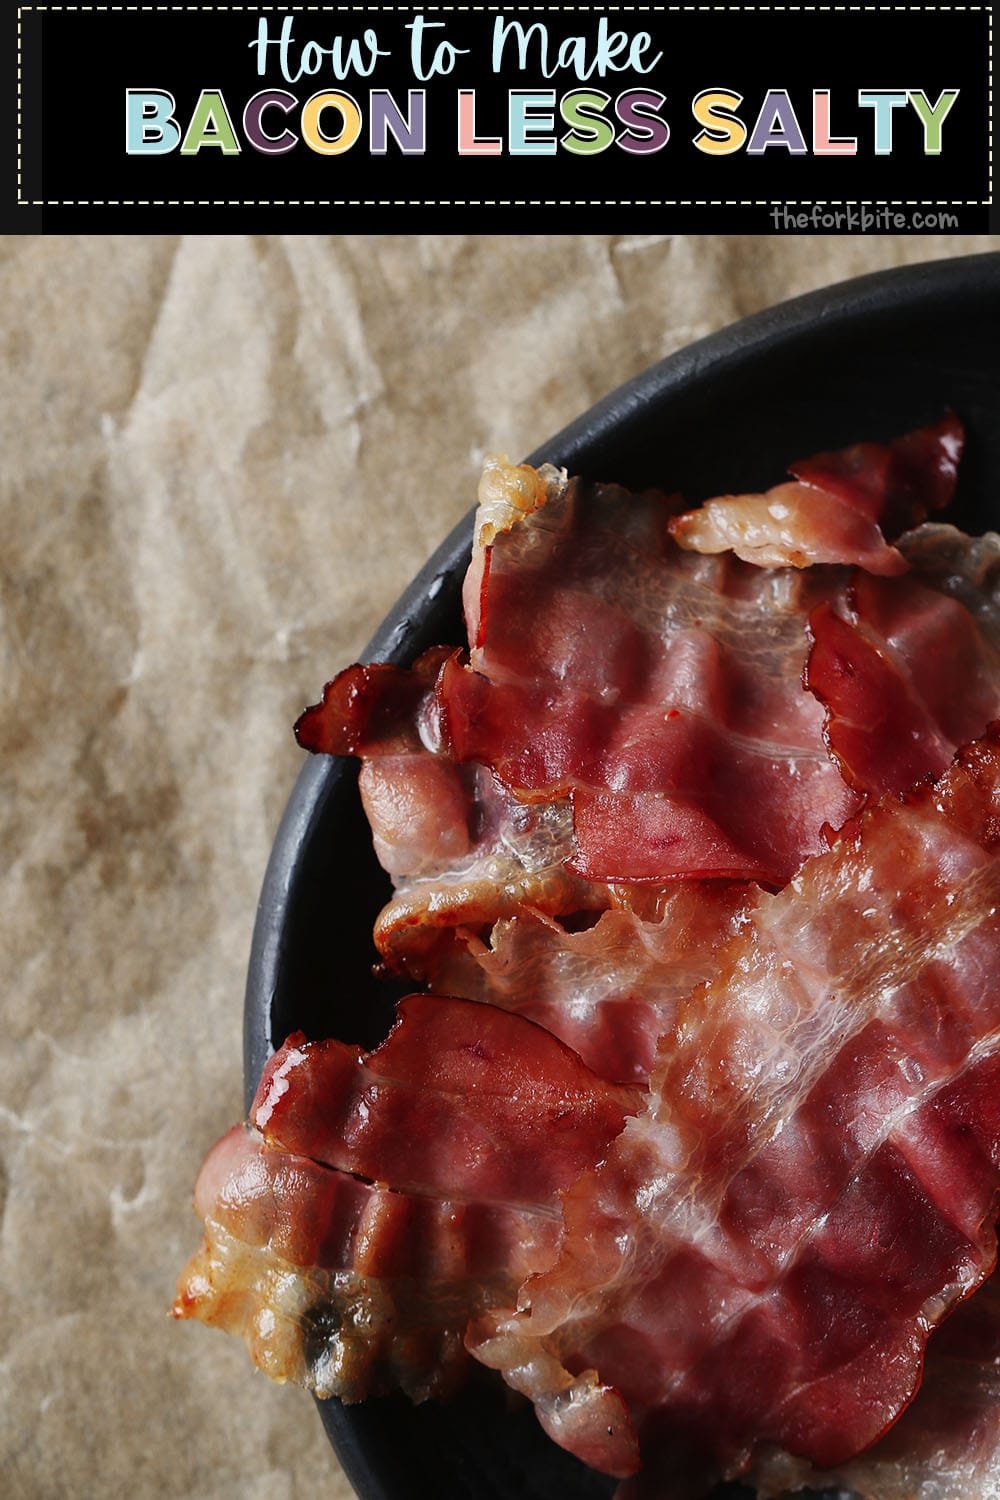 Bacon is not only smoky but also has lots of salt or sodium. Often, this salty flavor gets overpowering, even if you cure it yourself, especially if you want to reduce your sodium intake.